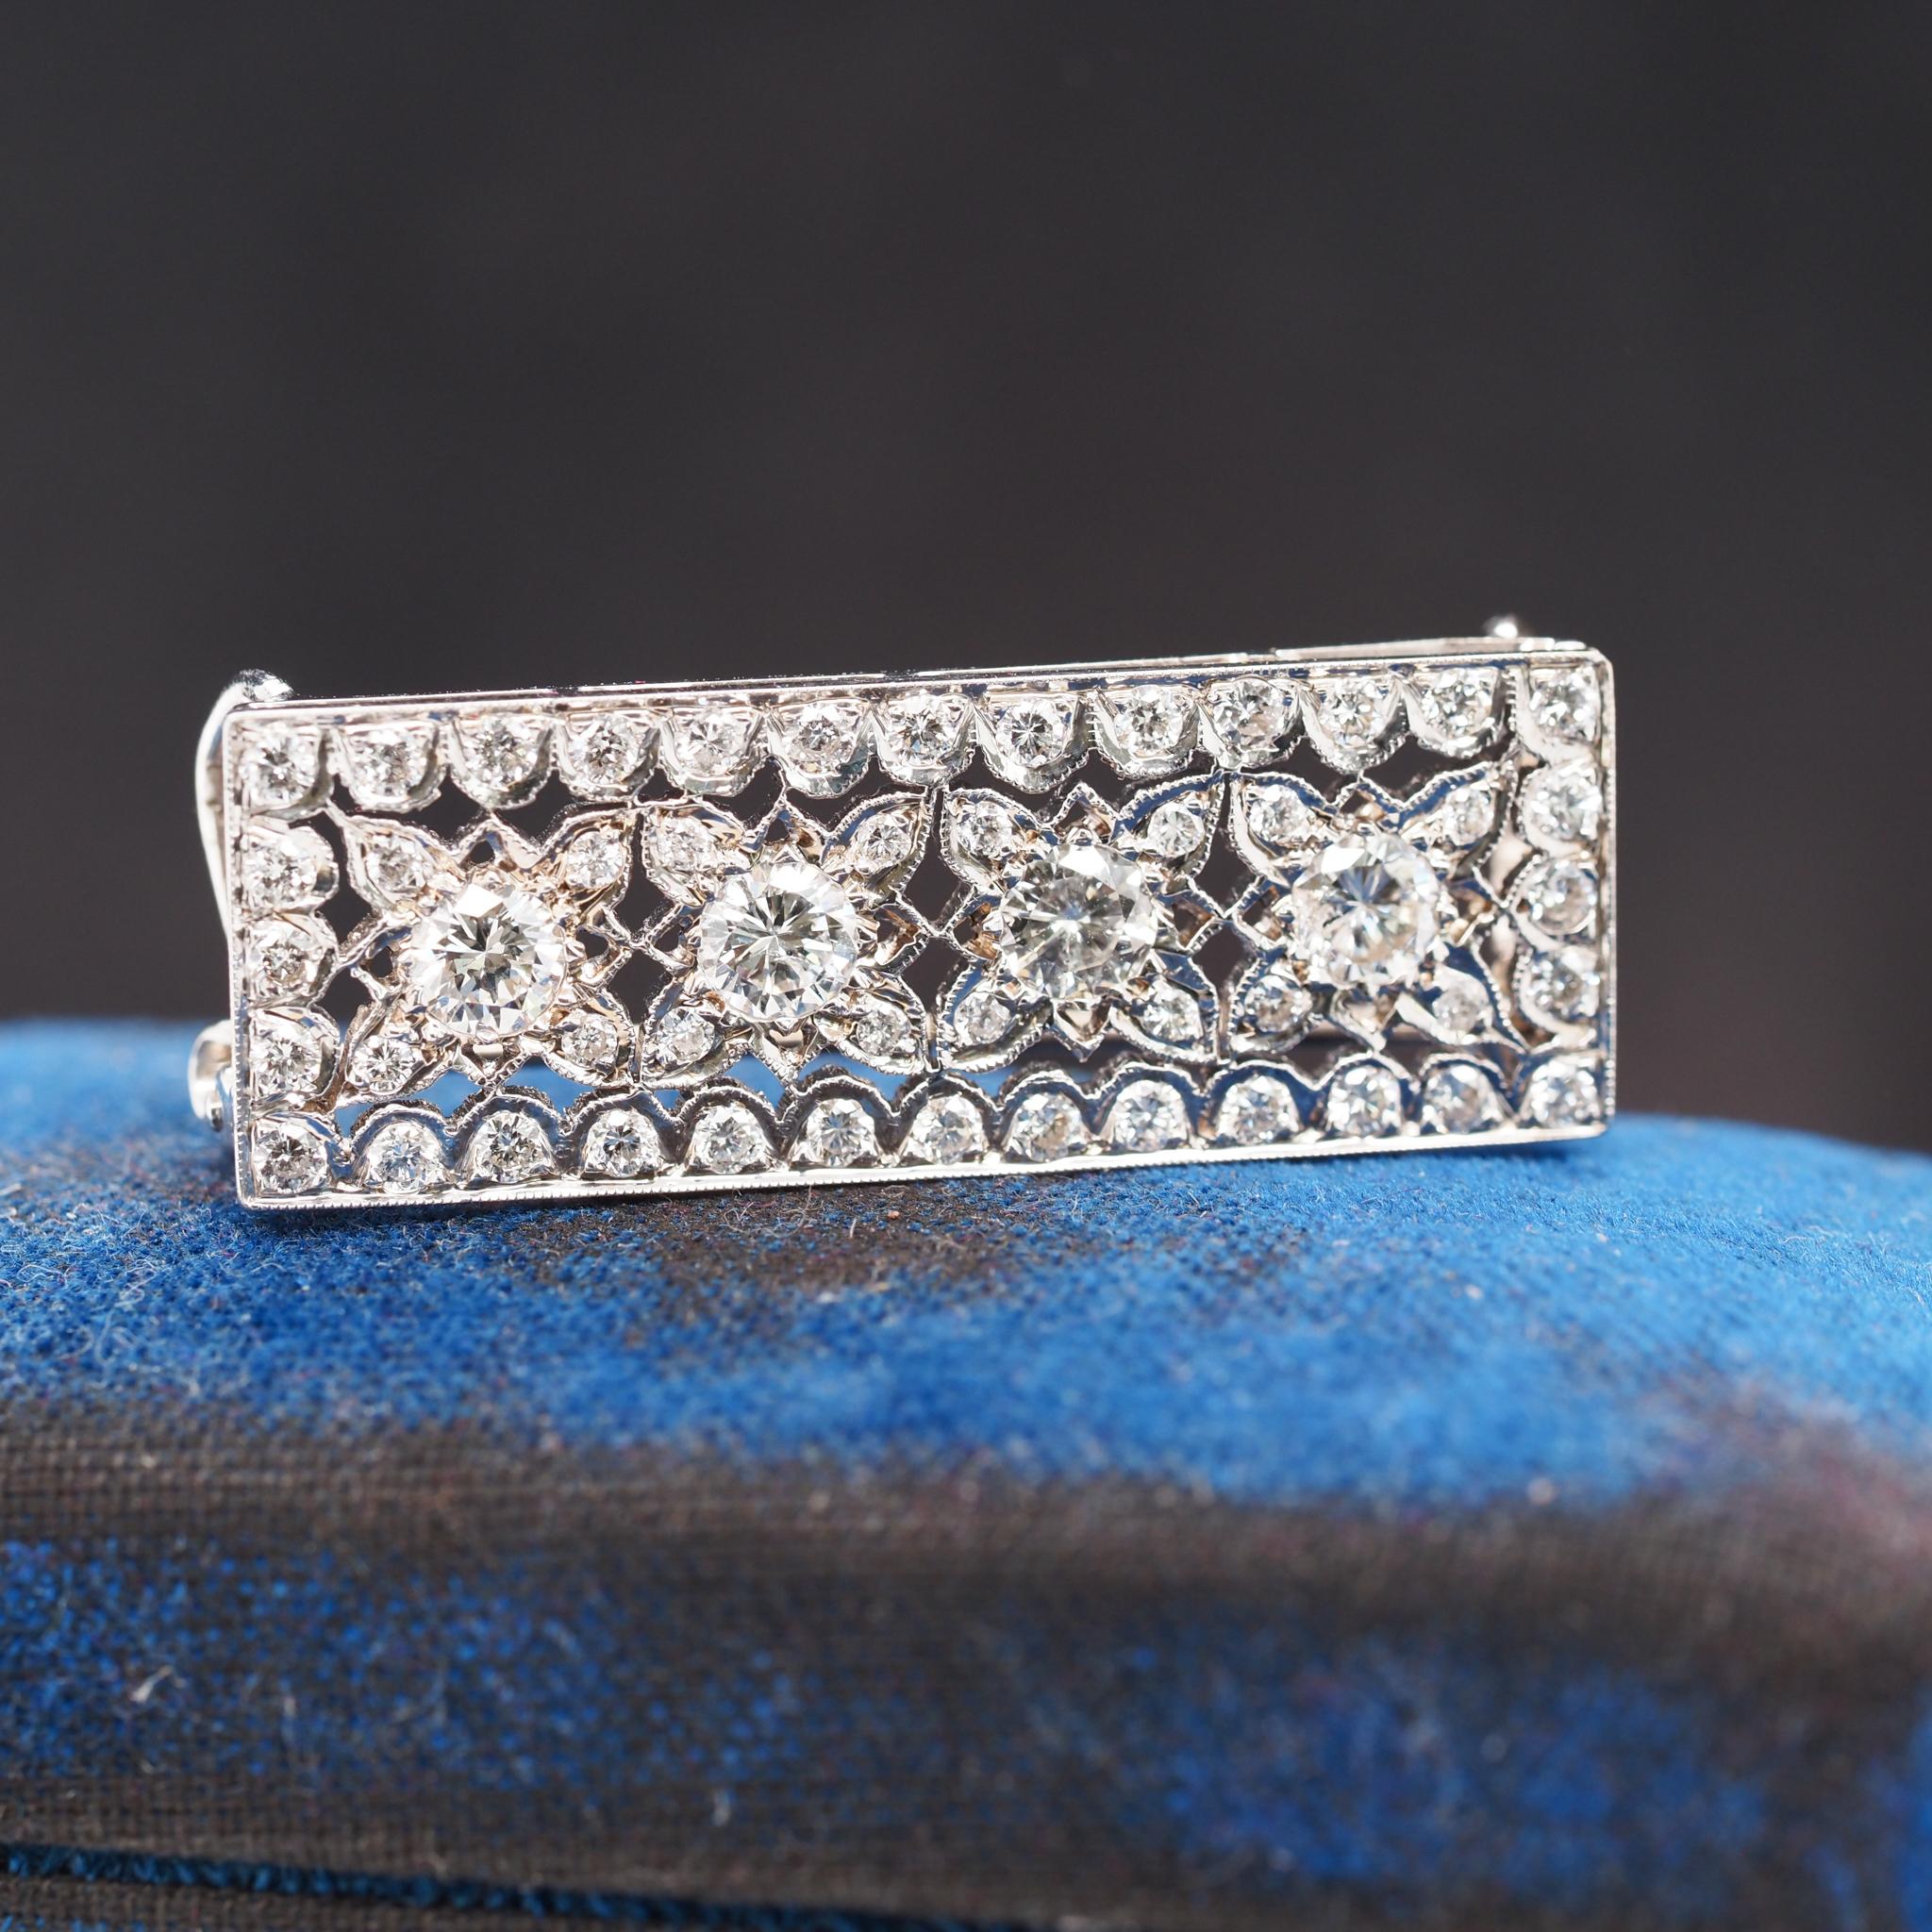 Metal Type: 14K White Gold [Hallmarked, and Tested]
Weight: 6.1 grams

Measurement: 1.5 inch long
Condition: Excellent